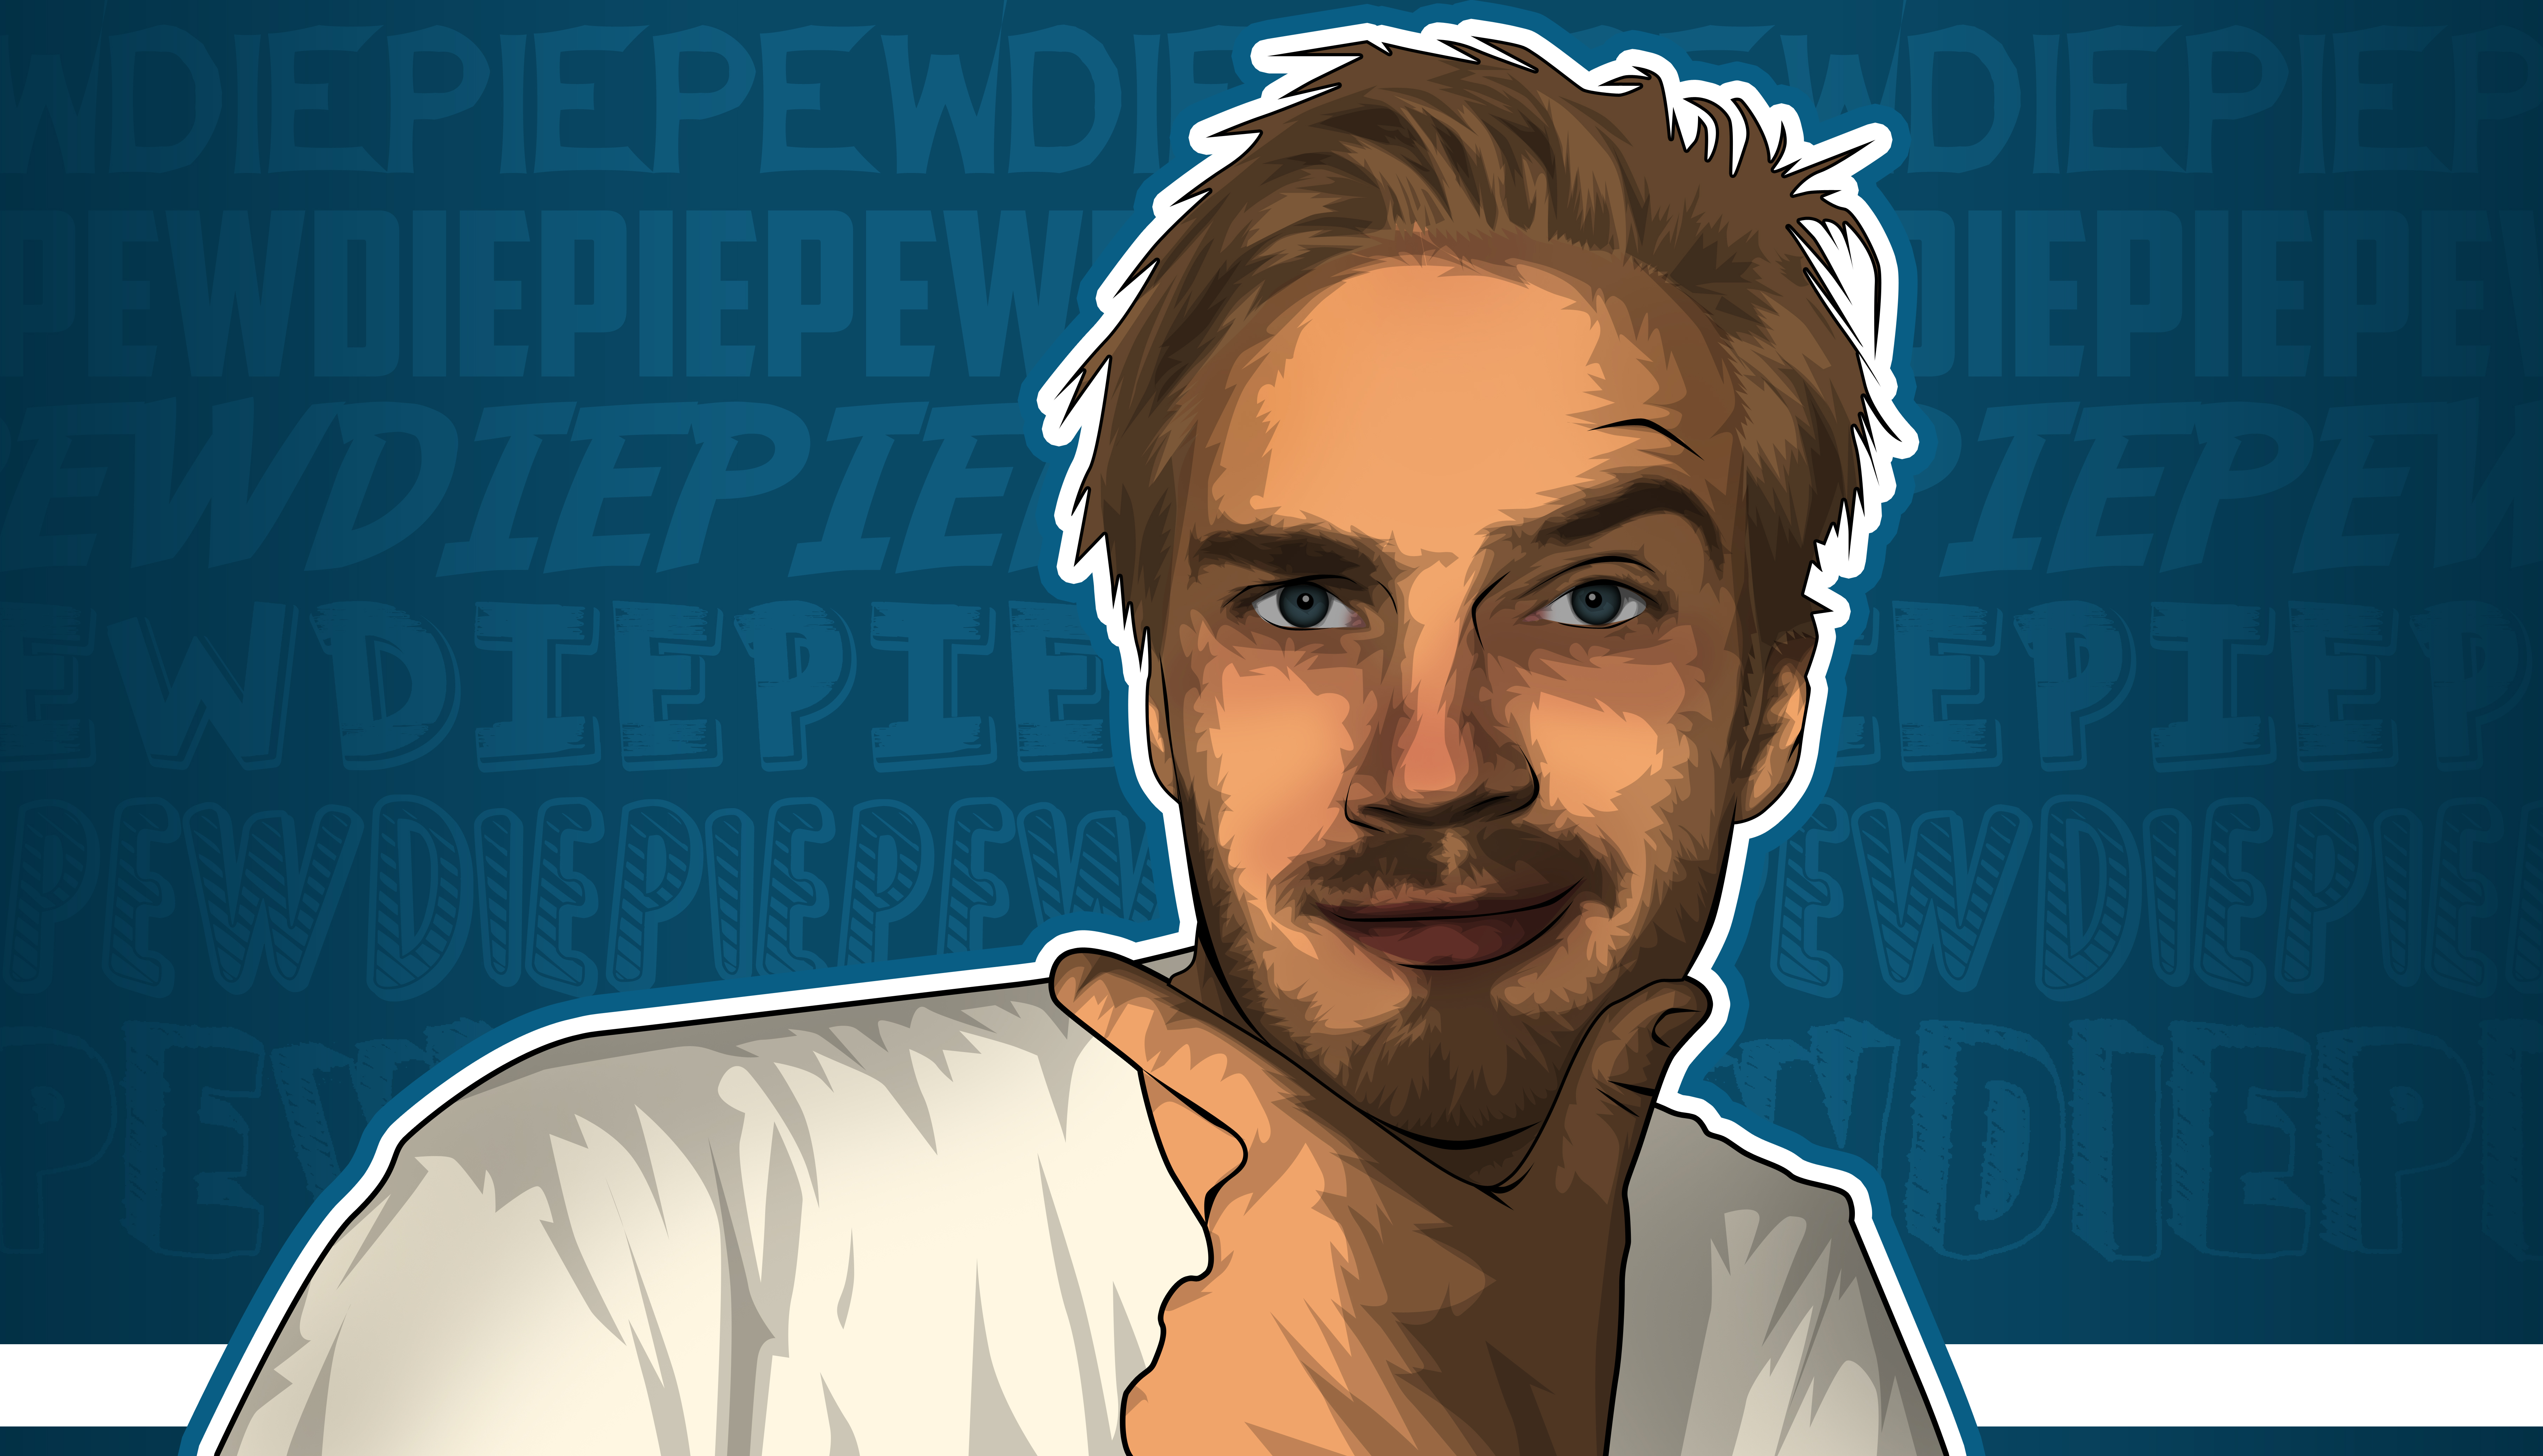 20+ PewDiePie HD Wallpapers and Backgrounds